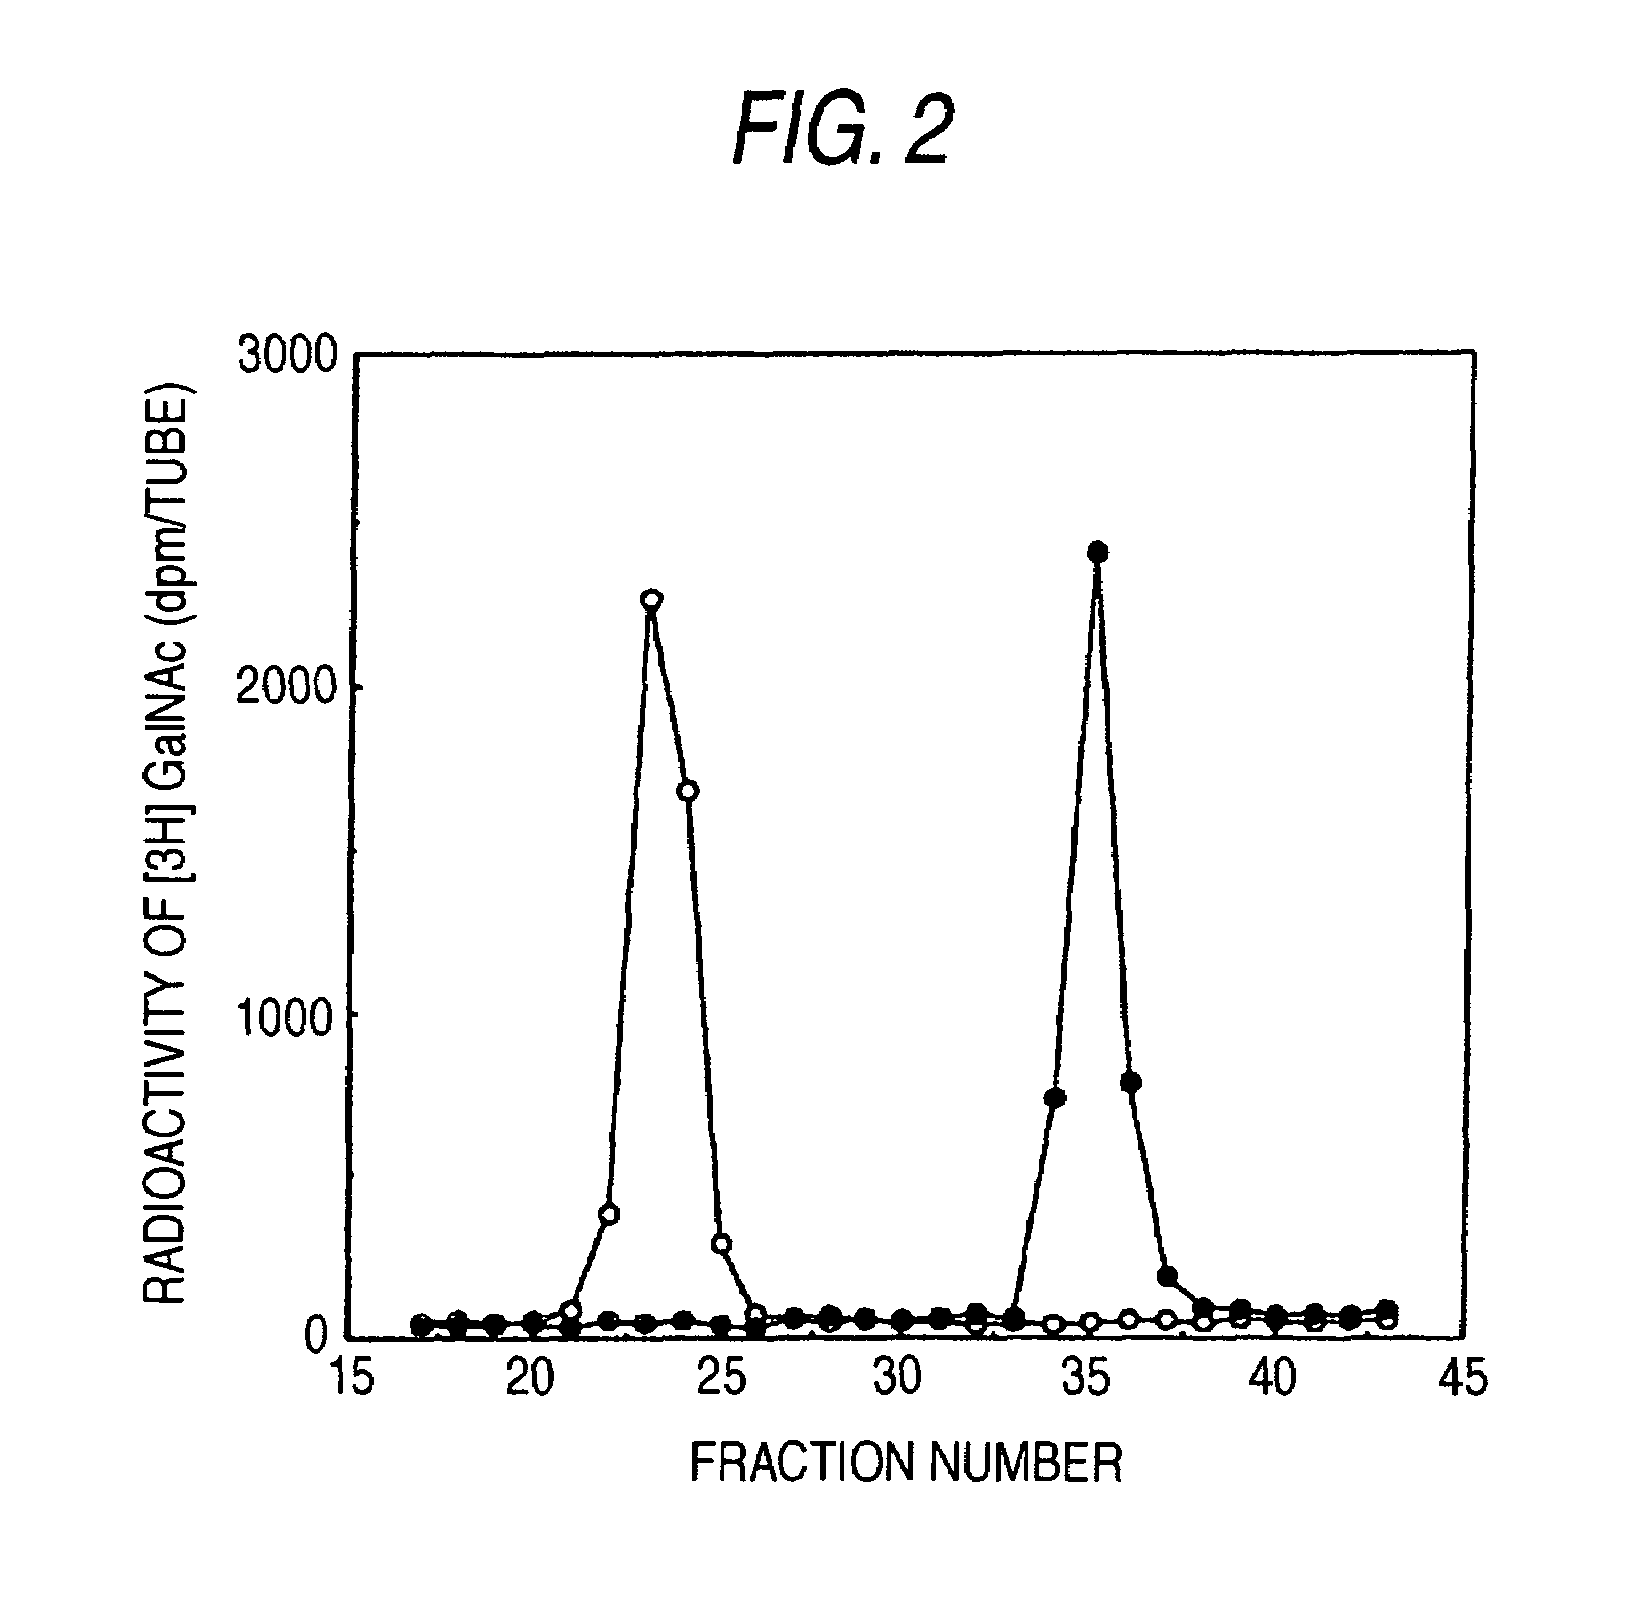 Chondroitin synthase and nucleic acid encoding the enzyme